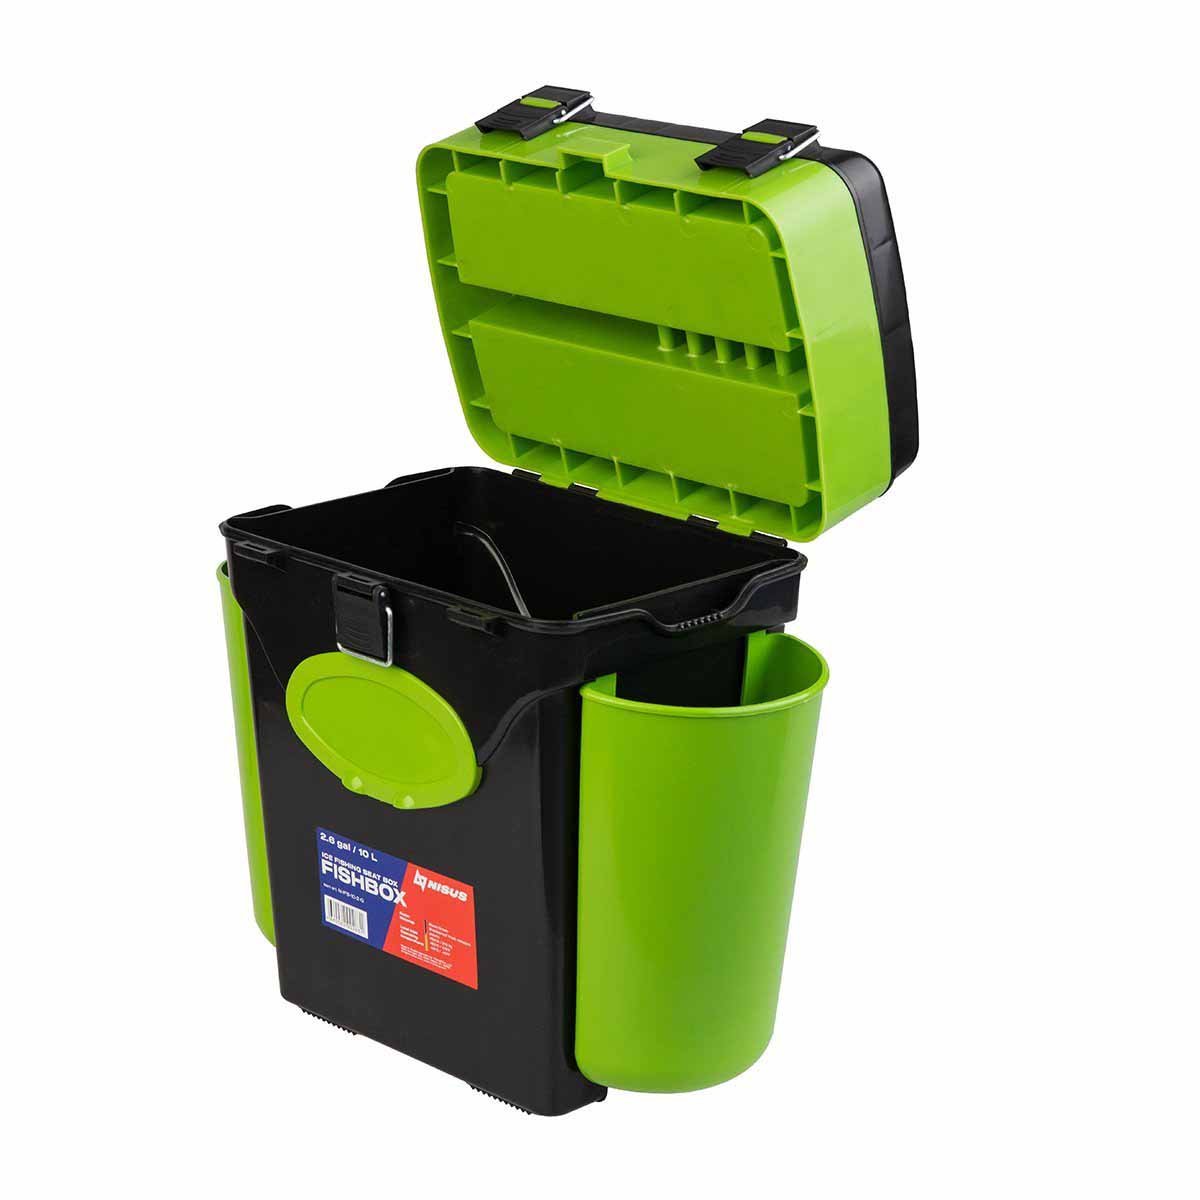 FishBox 10 liter SeatBox for Ice Fishing has 2 compartments for tackle storage